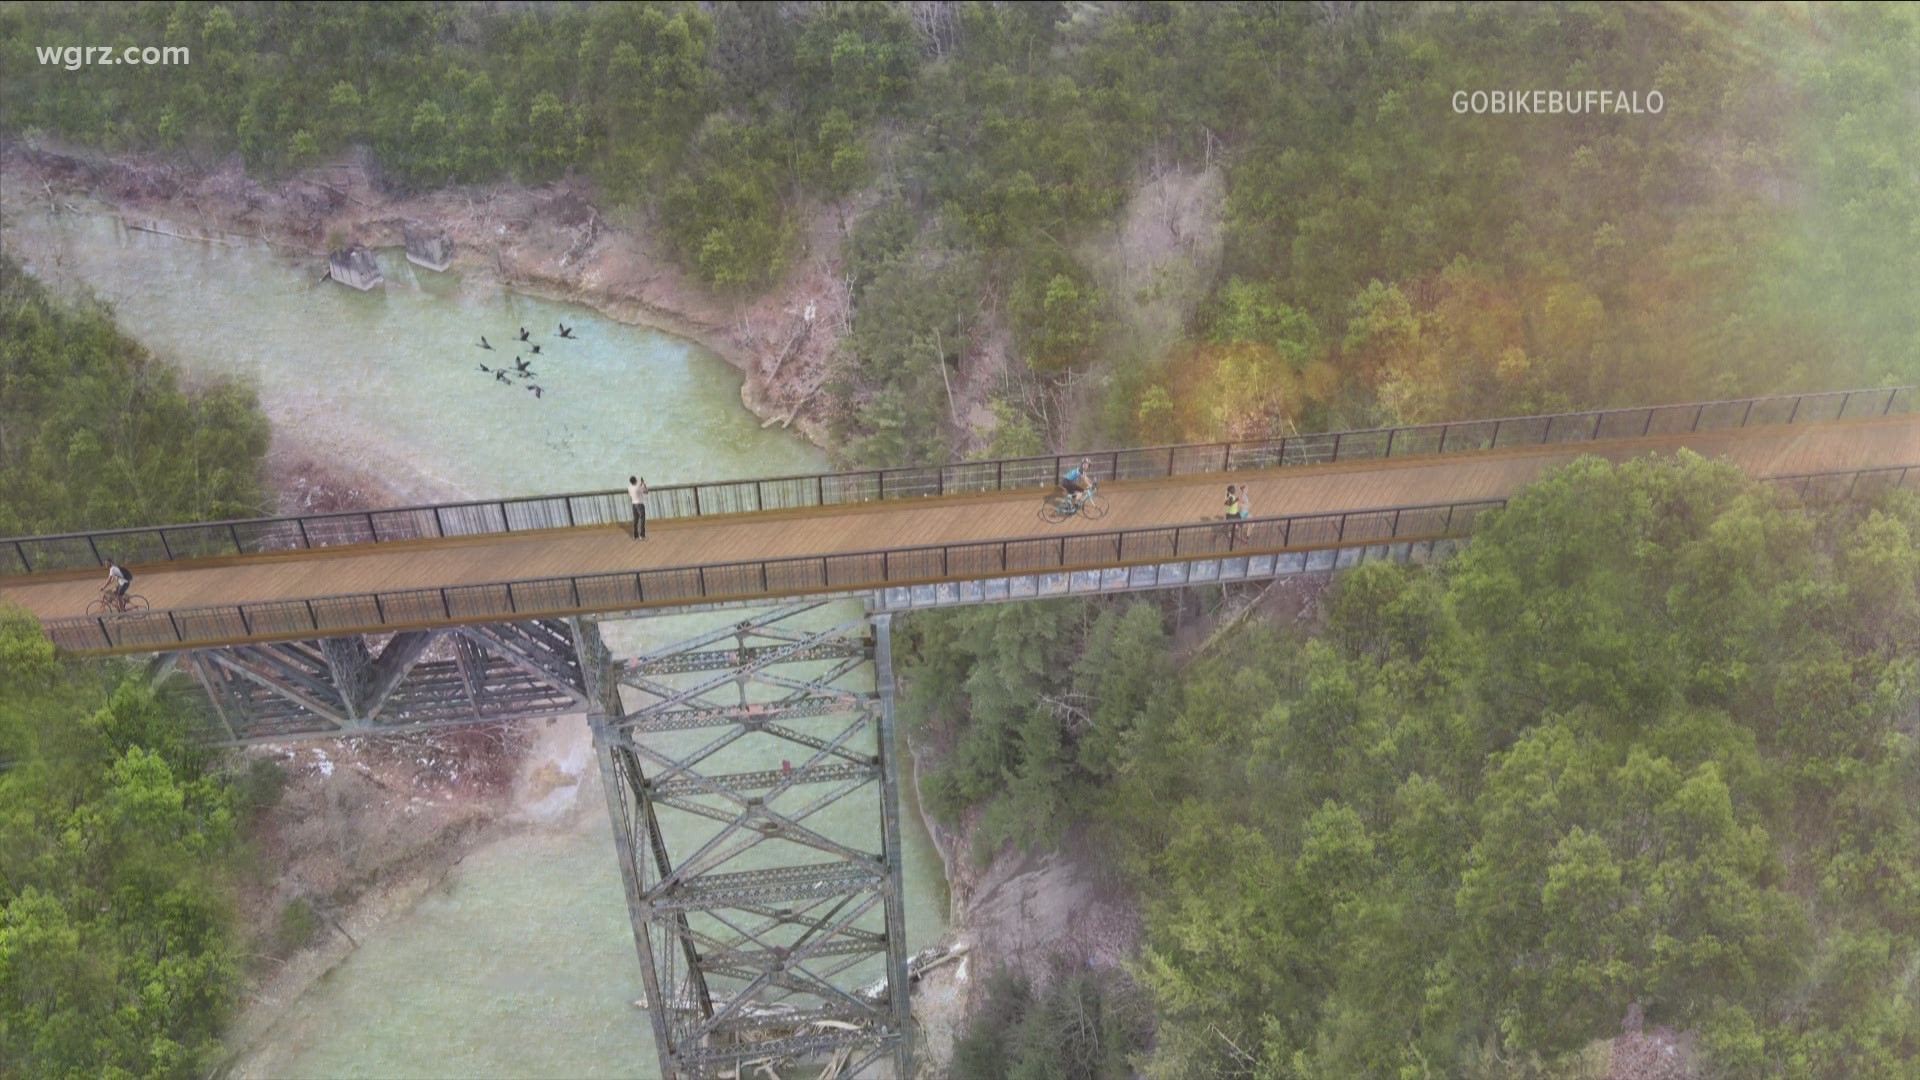 New trail could connect Buffalo to Southern Tier